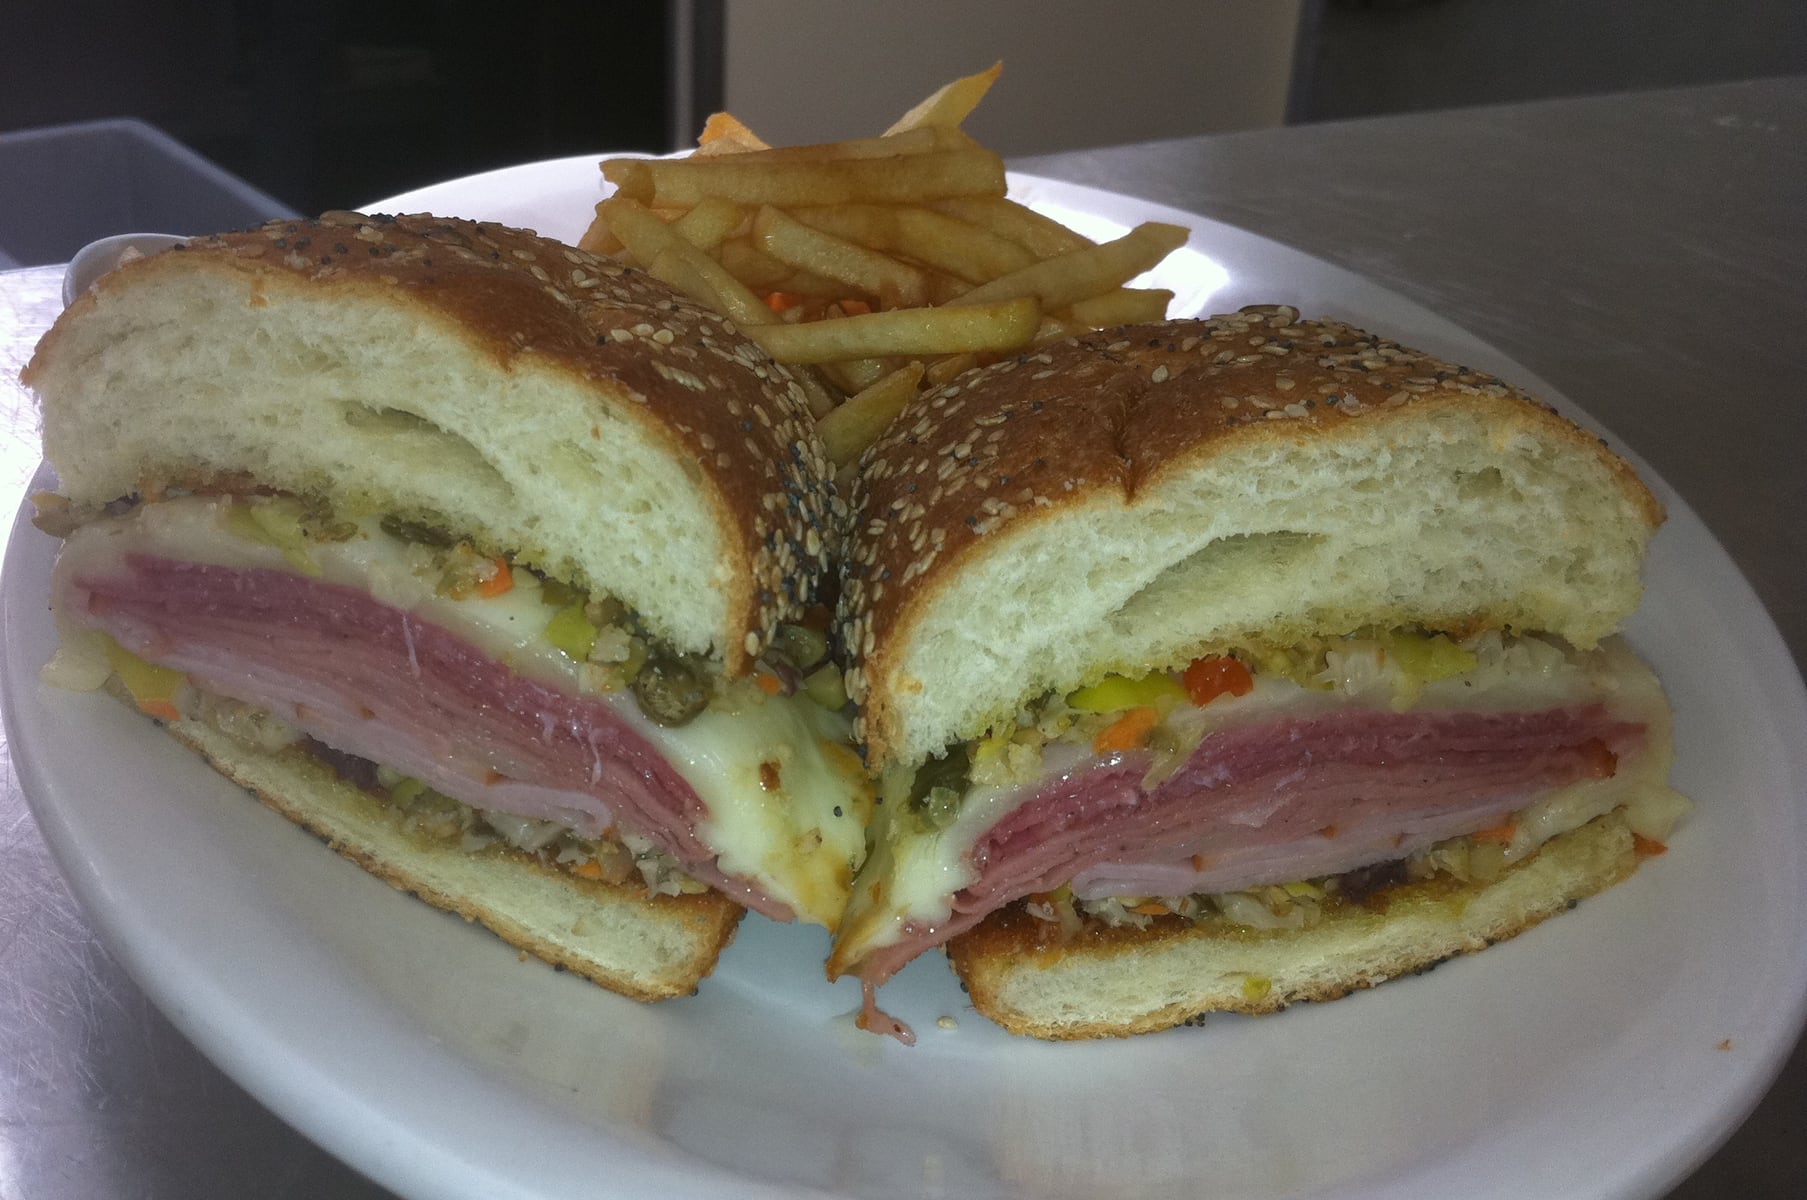 I Make A Pretty Mean Muffaletta At The Restaurant If I Do Say So Myself. It's All About The House Made Olive Salad!